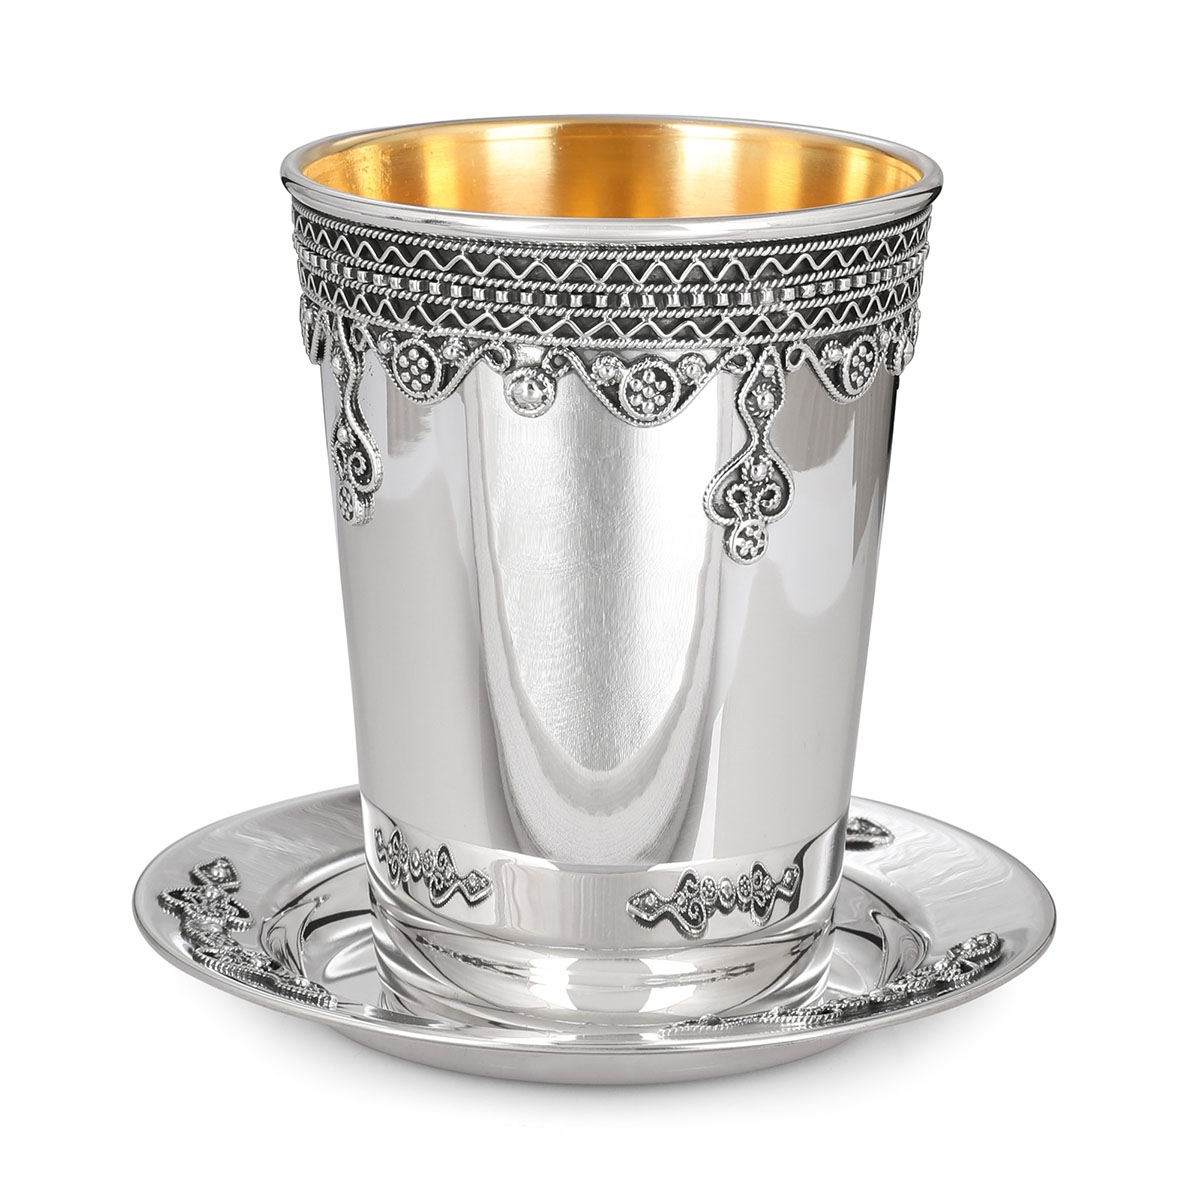 Traditional Yemenite Art Handcrafted Sterling Silver Kiddush Cup With Sophisticated Ornate Design - 1